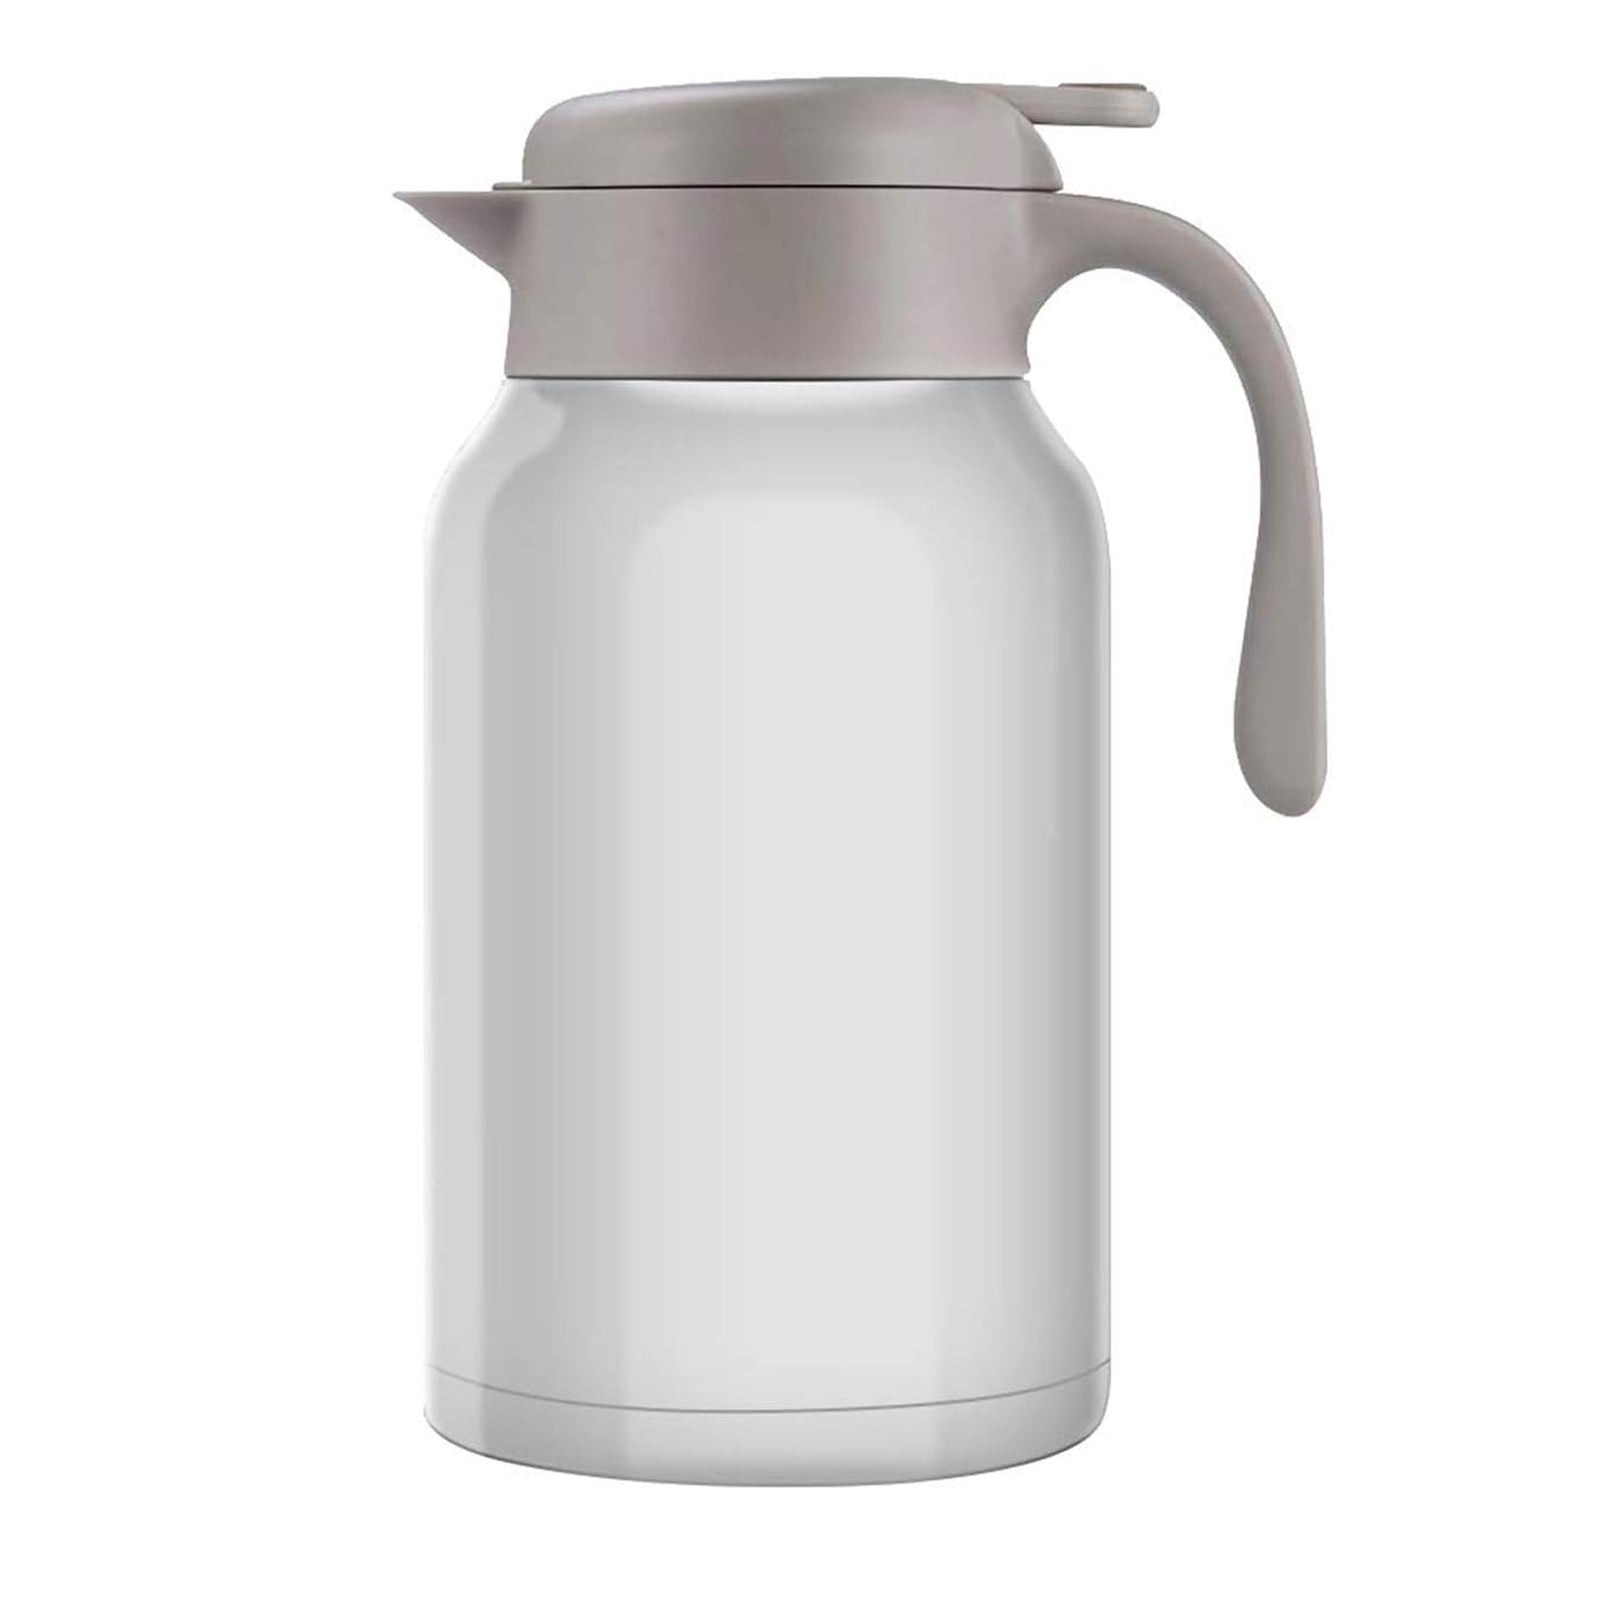 Stainless Steel Insulated Thermal Coffee Carafe - 2L (68oz)